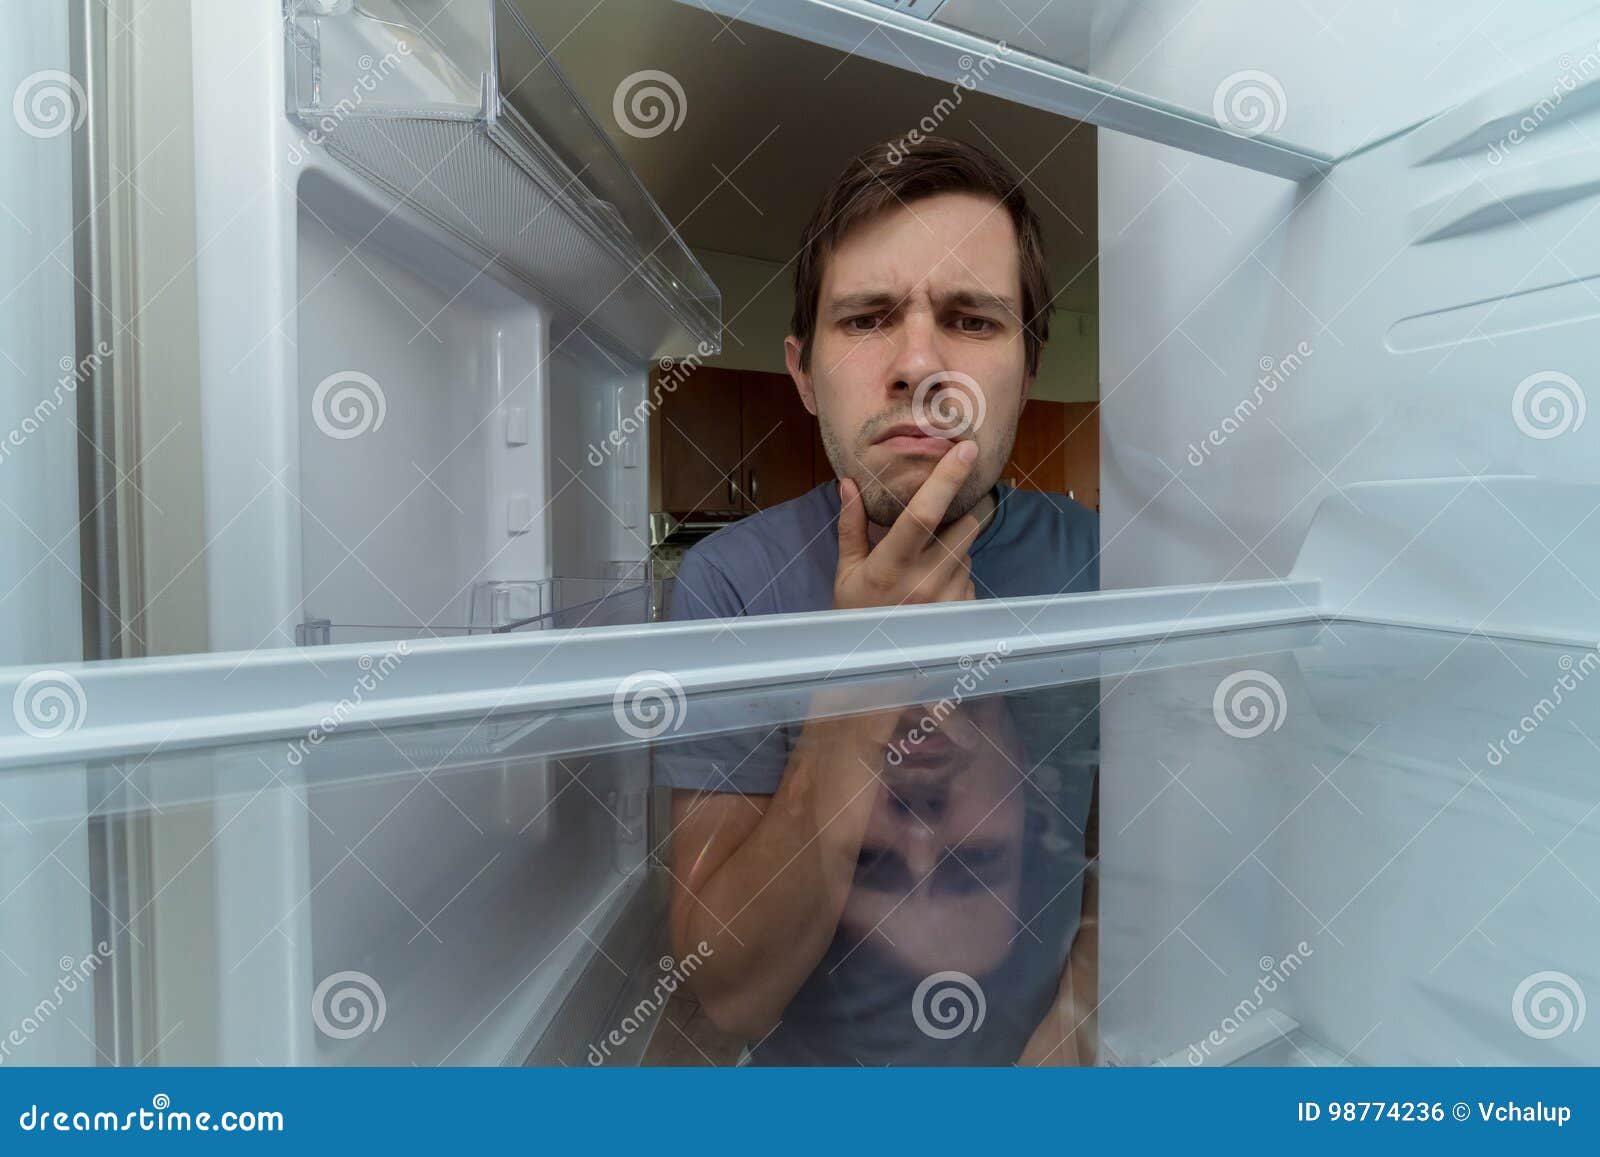 hungry man is looking for food in empty fridge